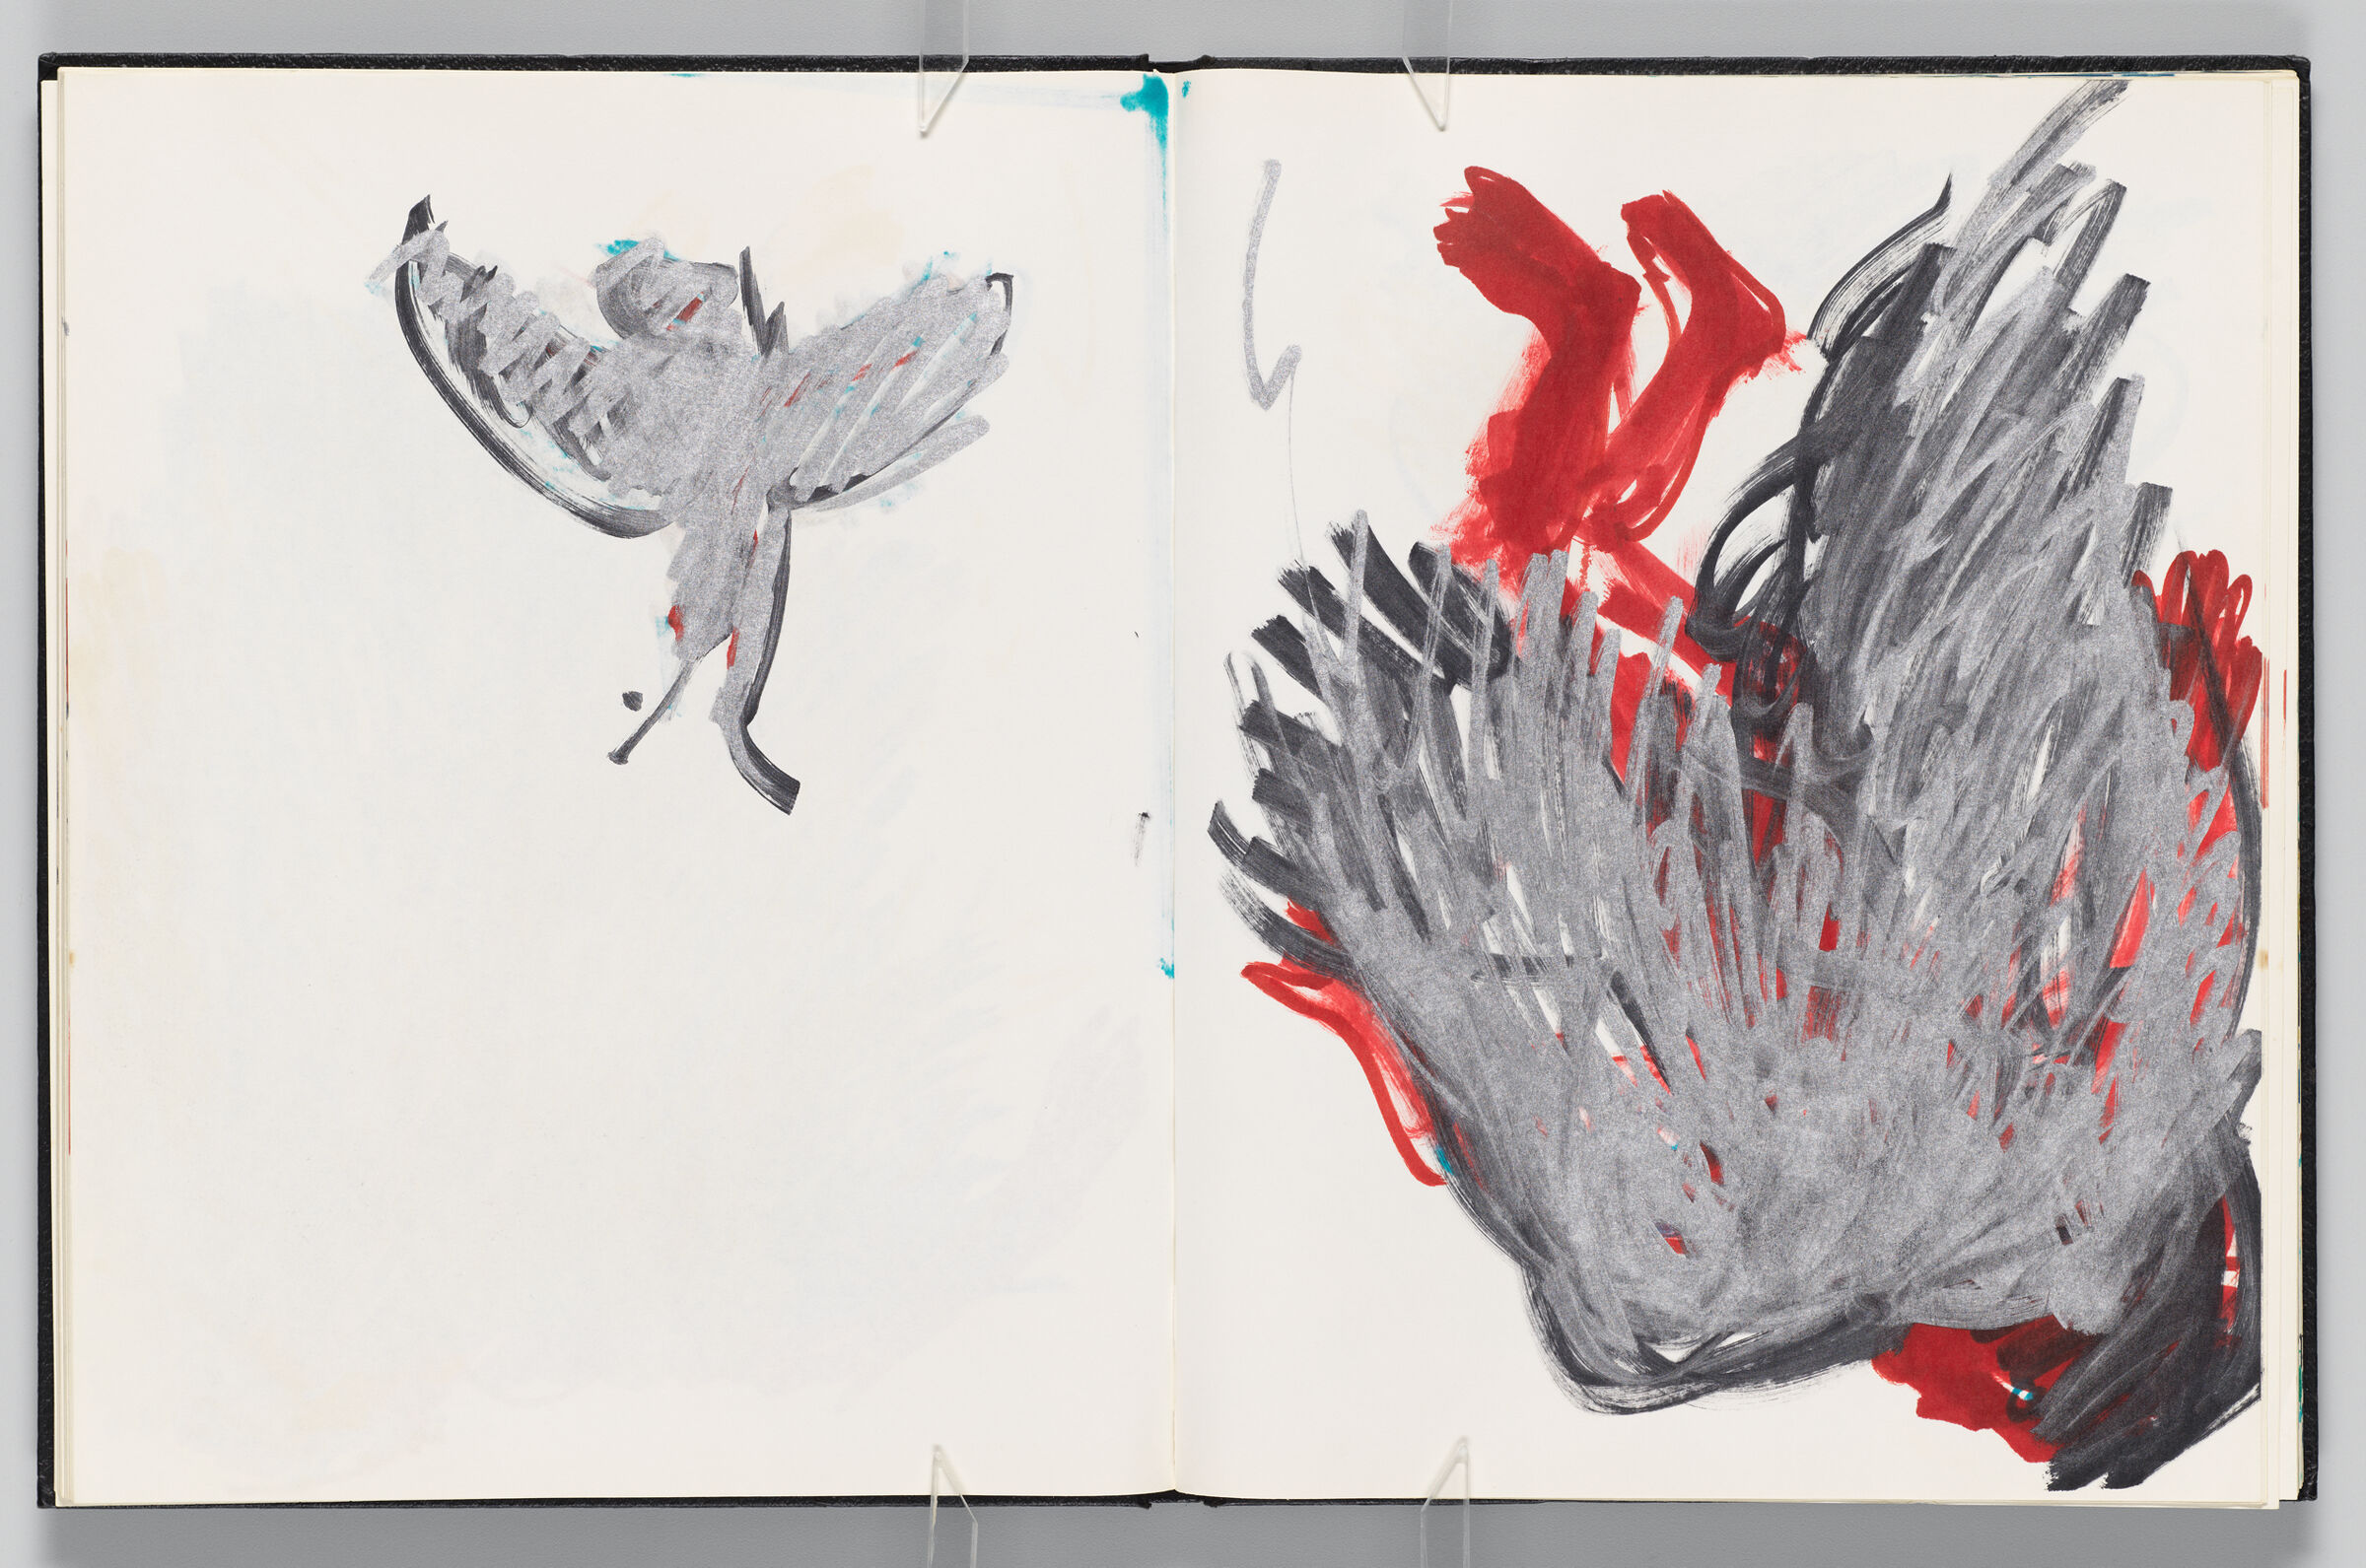 Untitled (Icarus, Left Page); Untitled (Icarus, Right Page)